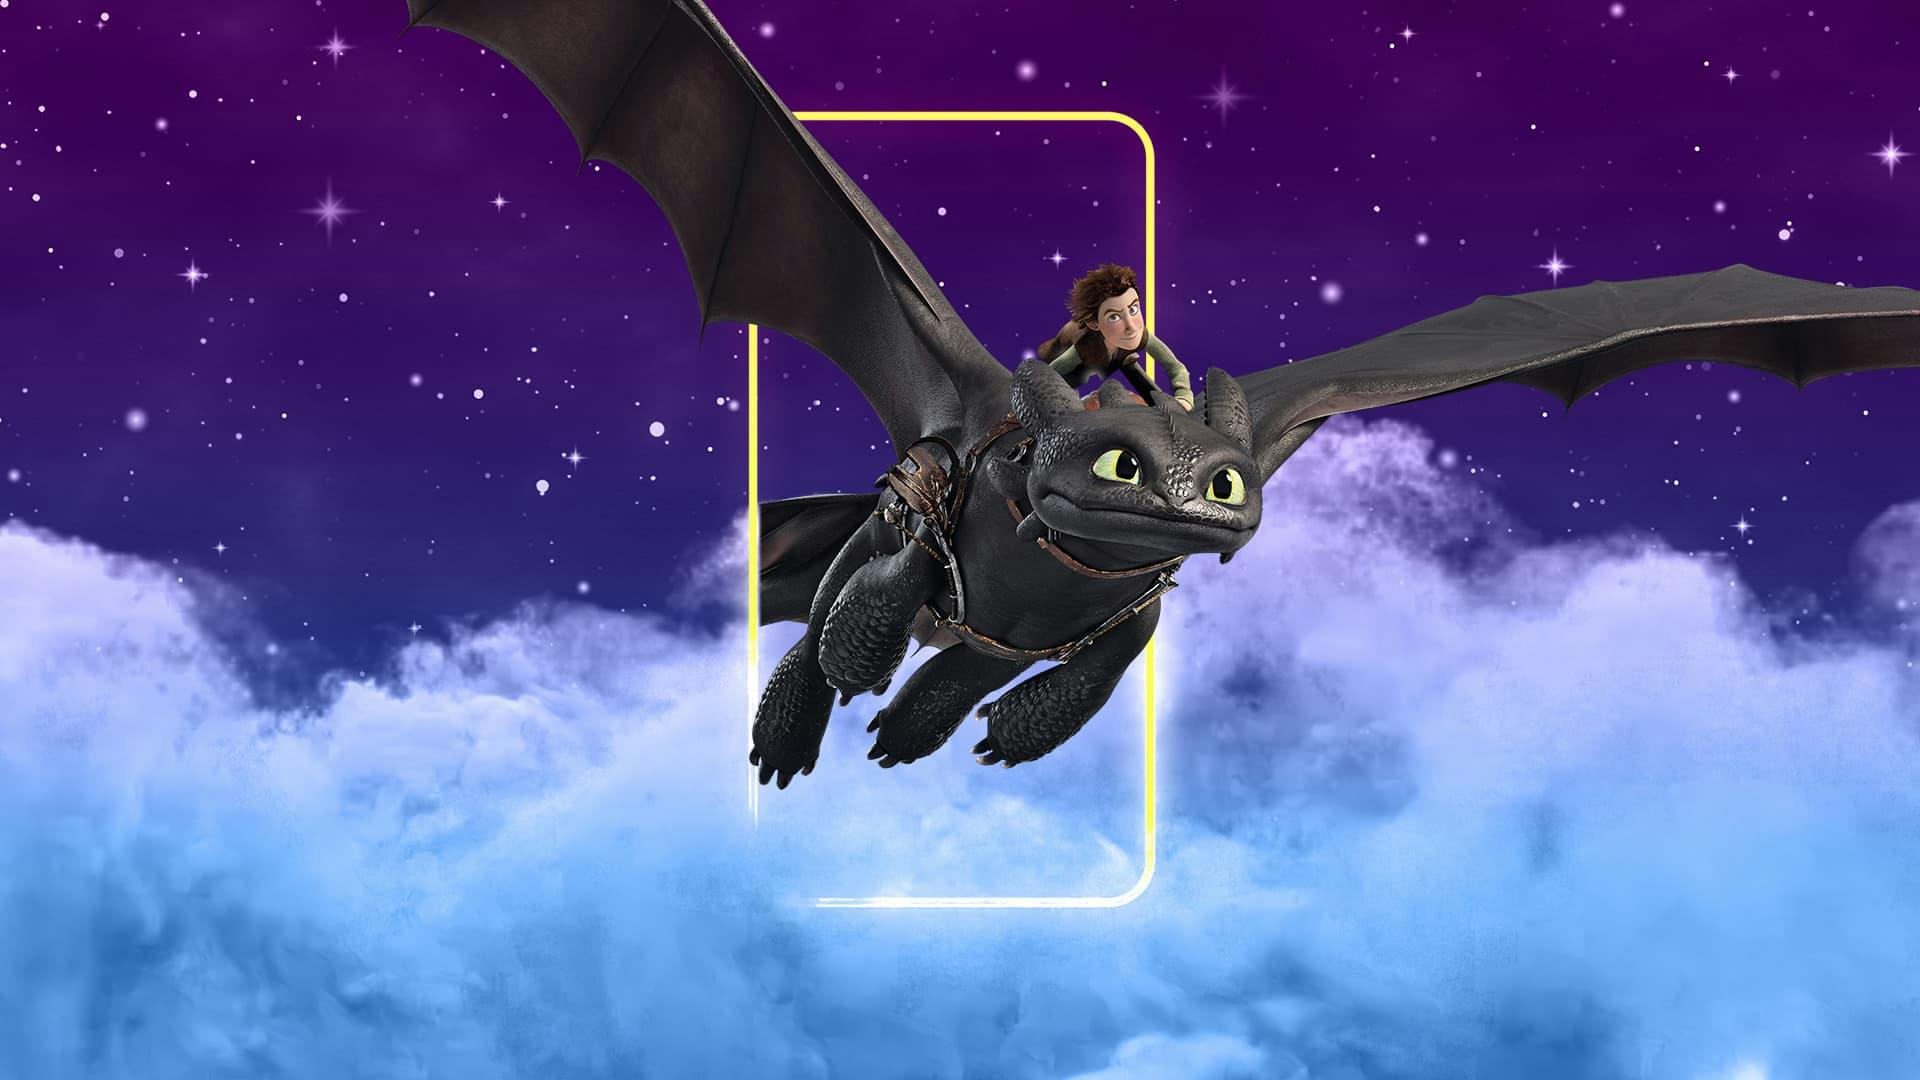 Toothless and Hiccup from DreamWorks How to Train your Dragon series fly through a neon window frame that's set in the clouds against a night sky.